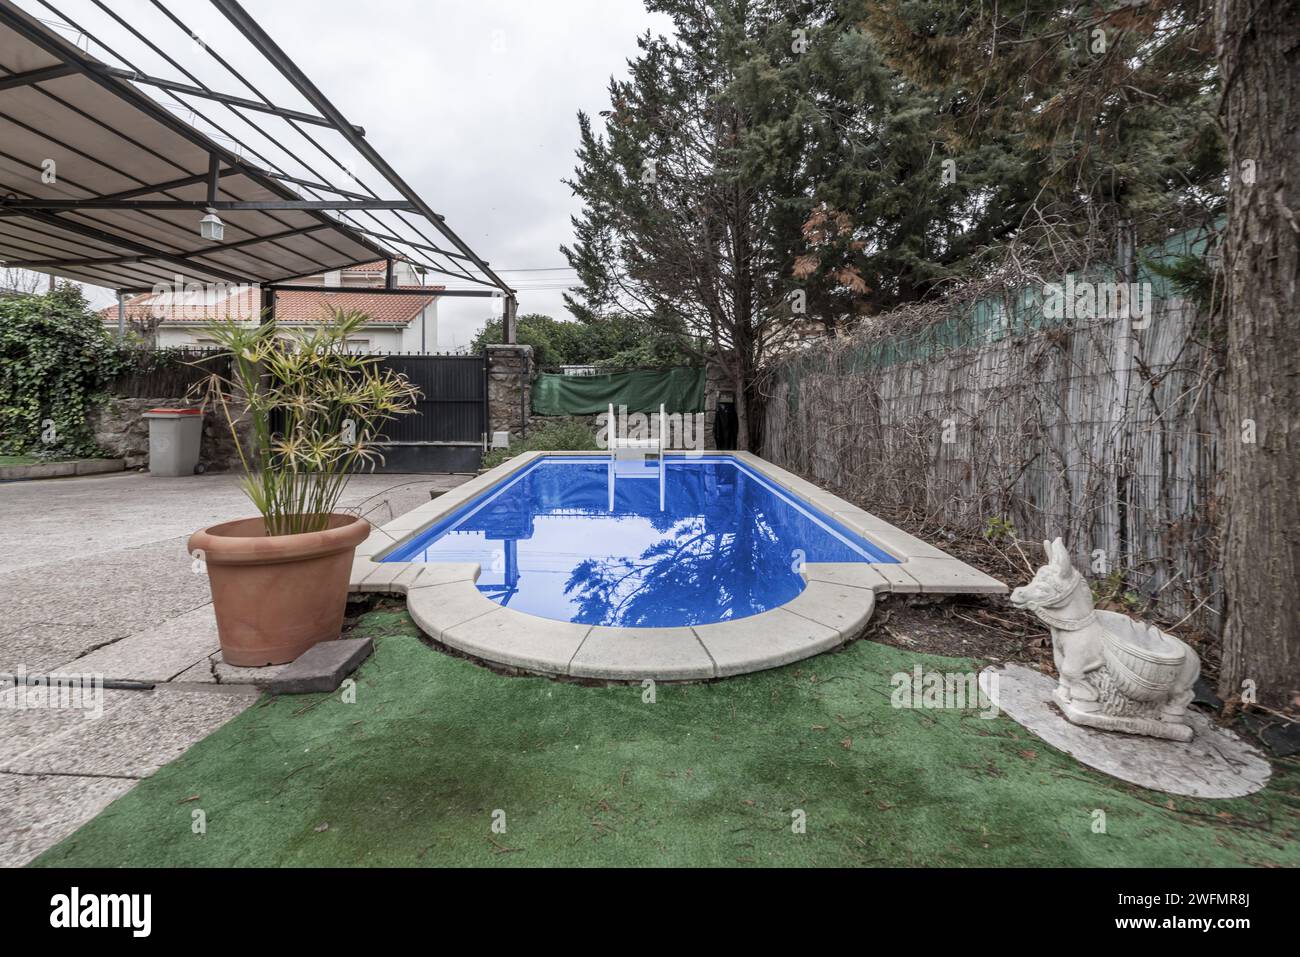 A small pool within a plot with a large awning with a metal structure Stock Photo